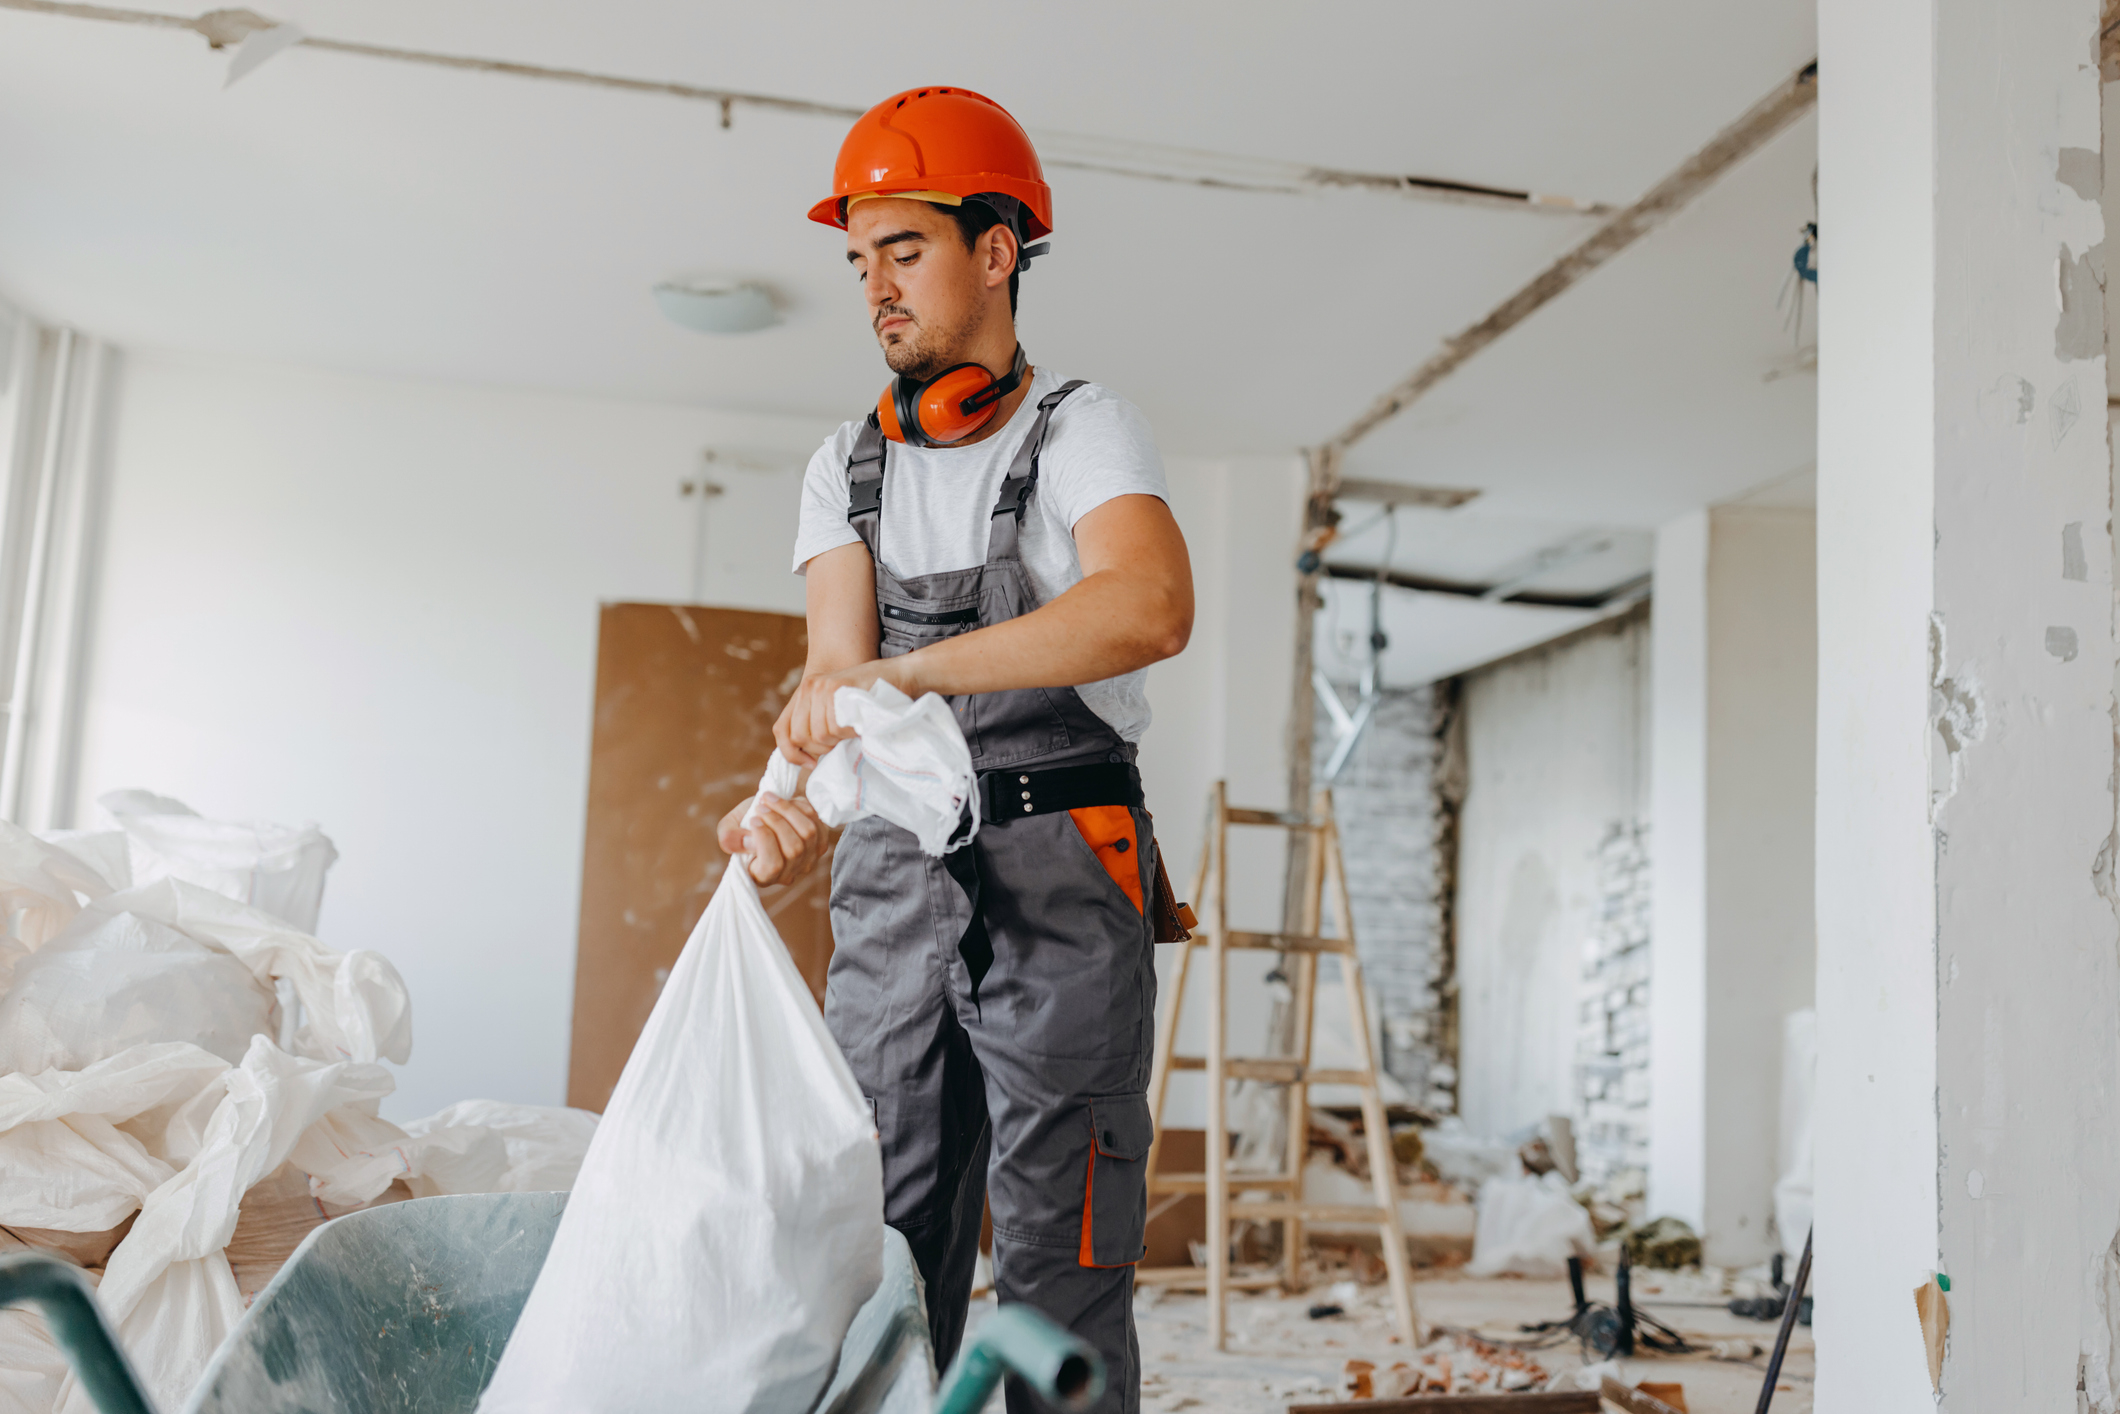 A man in a construction outfit and hard hat is working indoors, holding a large trash bag. There is construction debris and tools around him